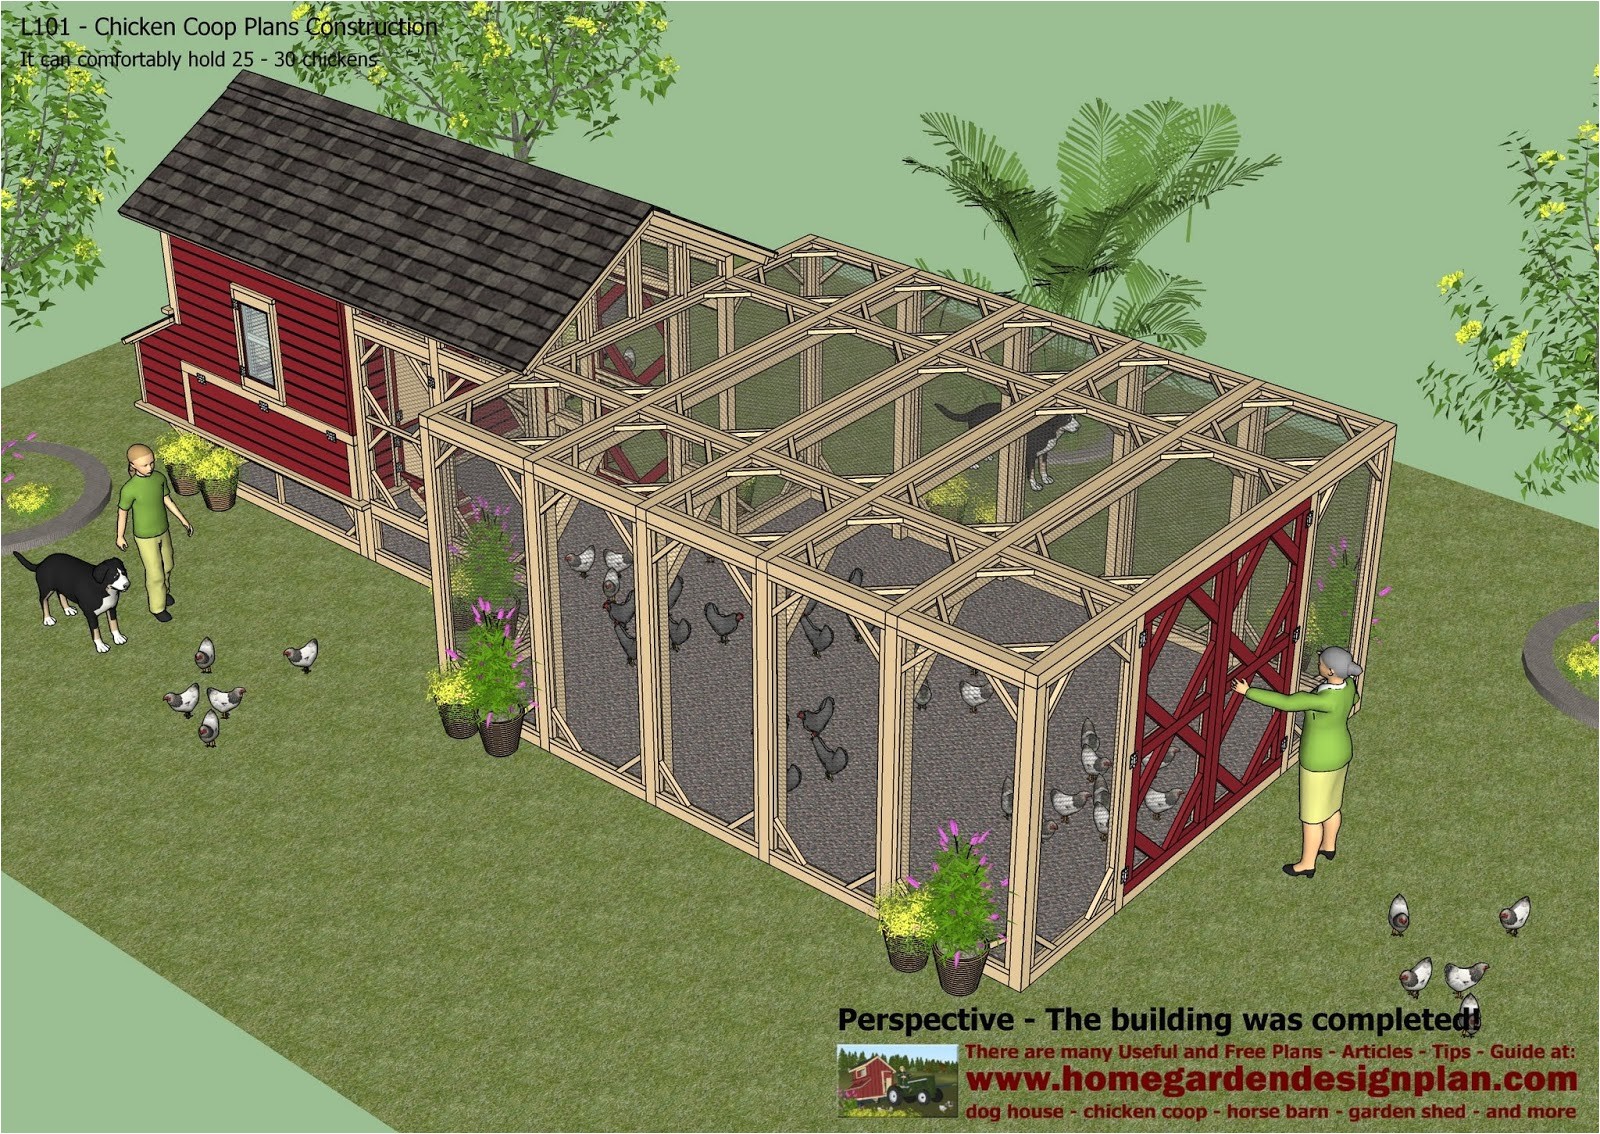 chicken coop plans for 20 chickens